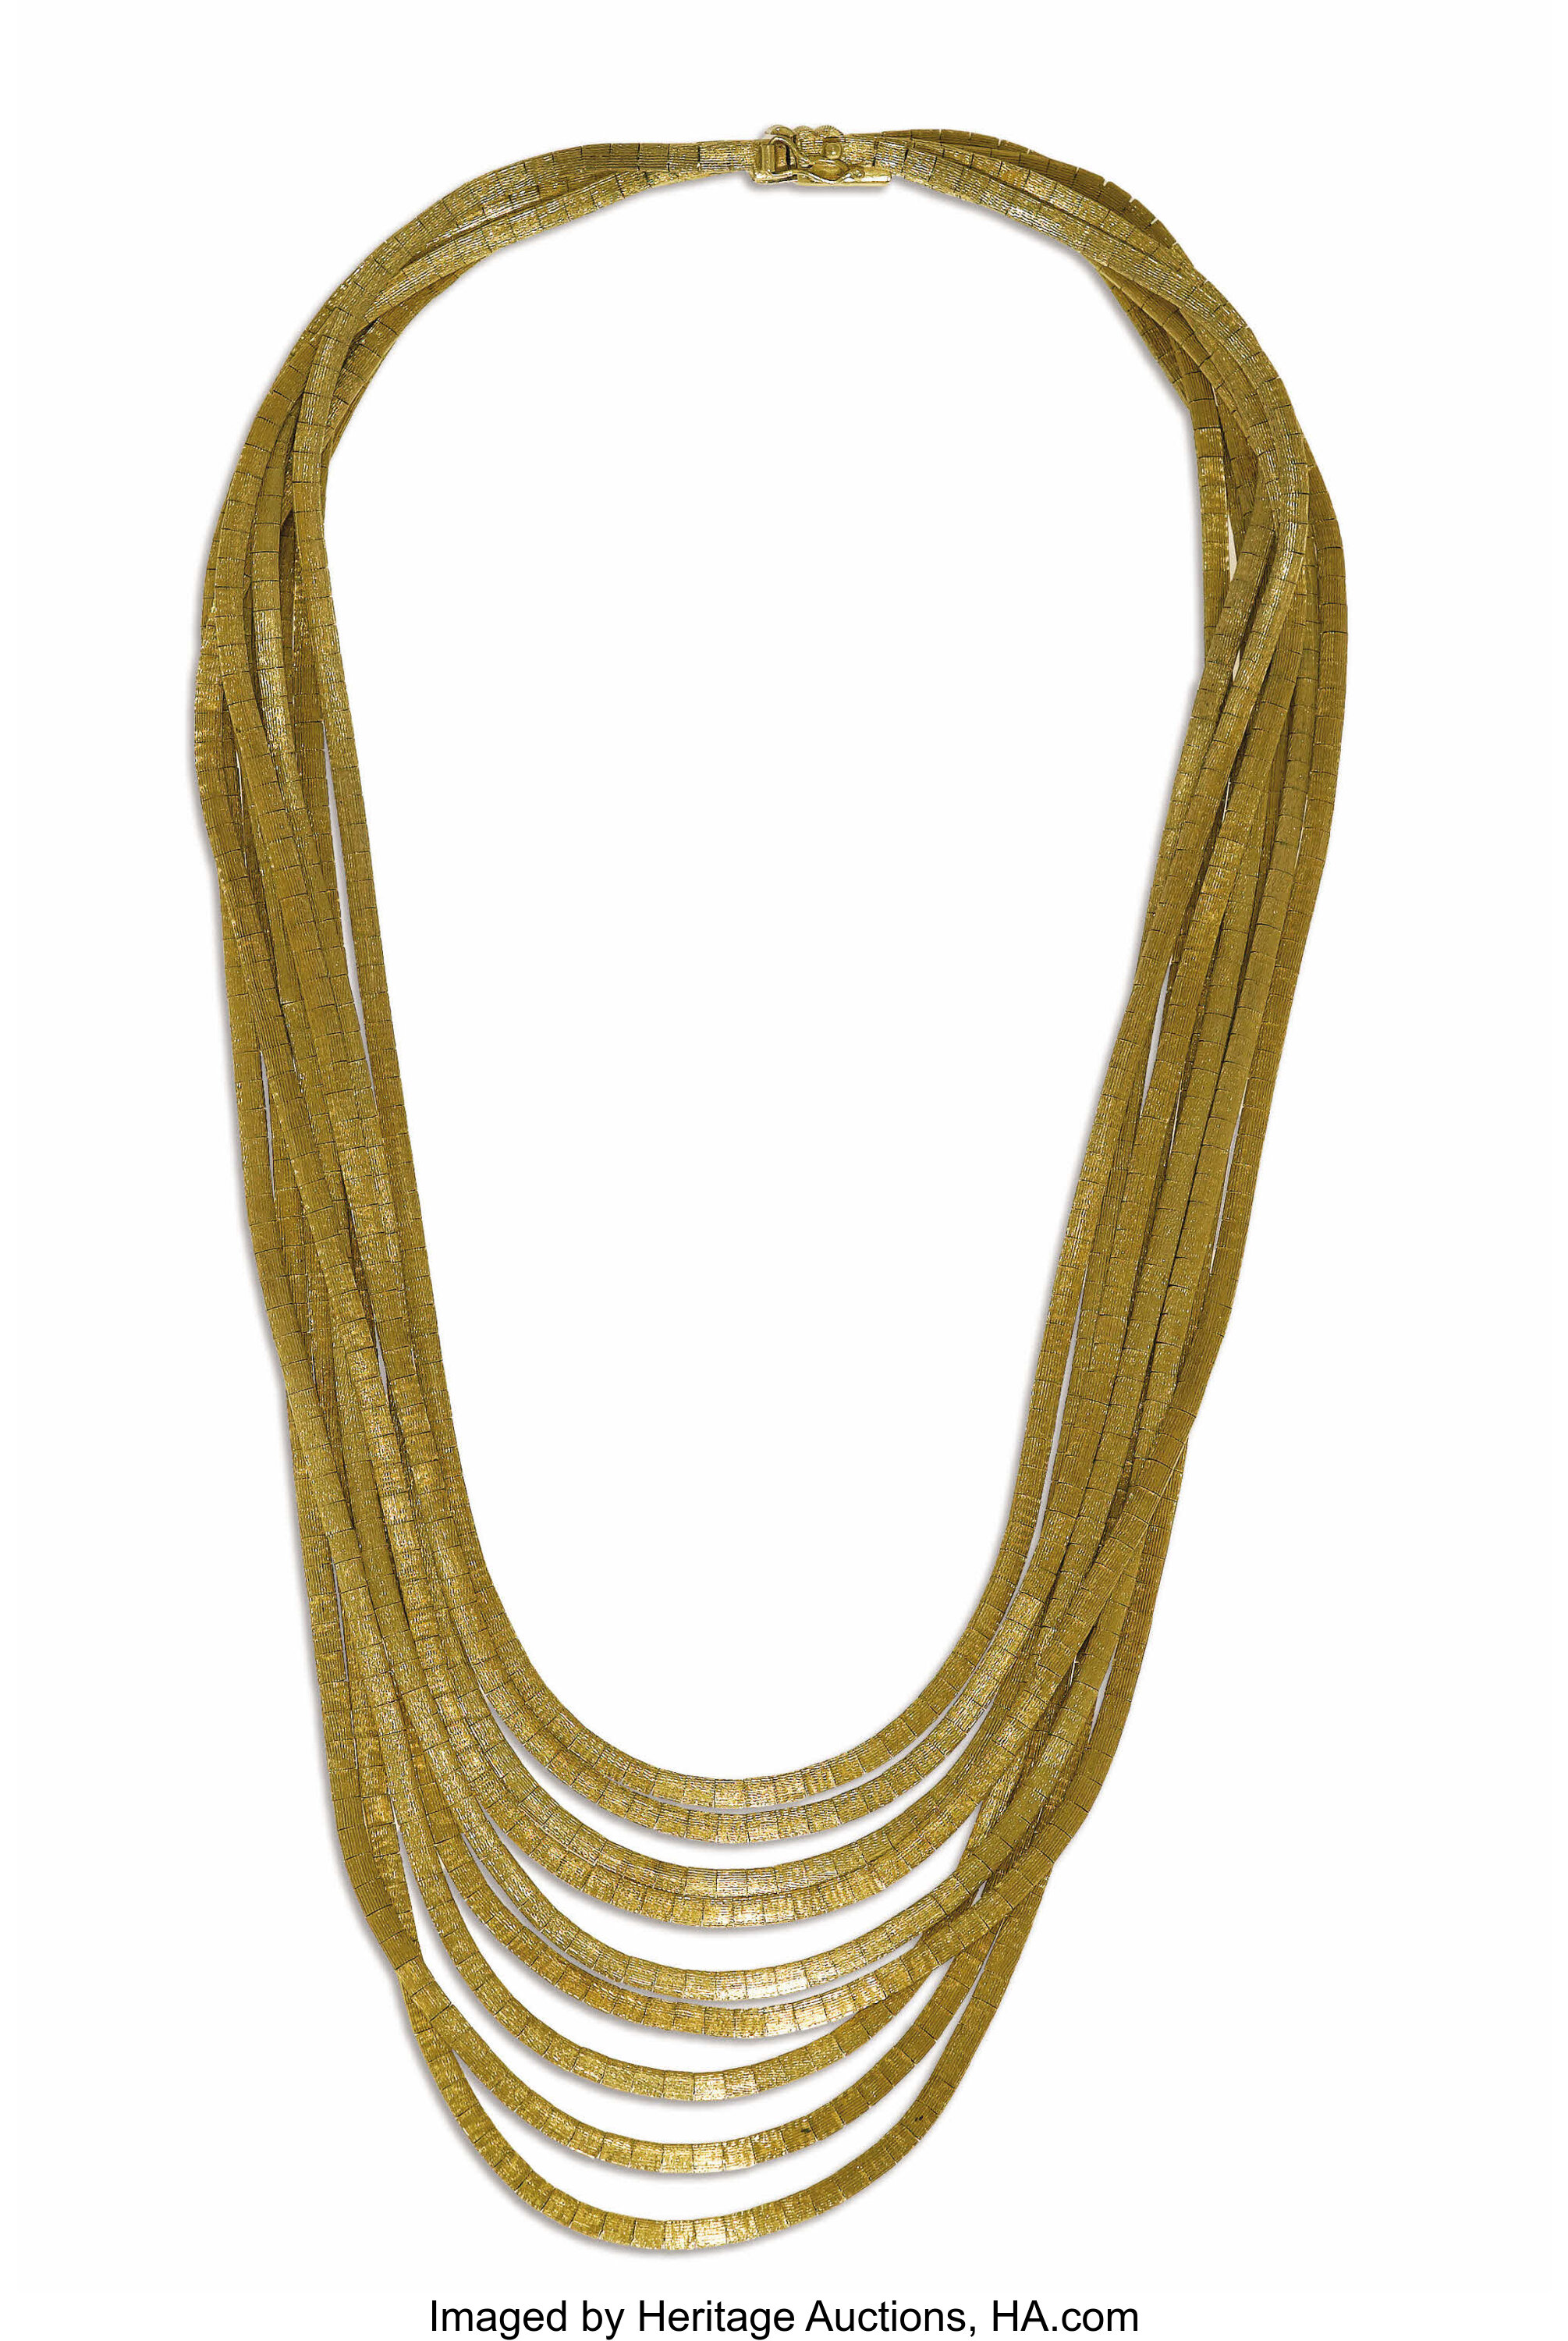 Gold Necklace. The spaghetti style necklace is composed of nine